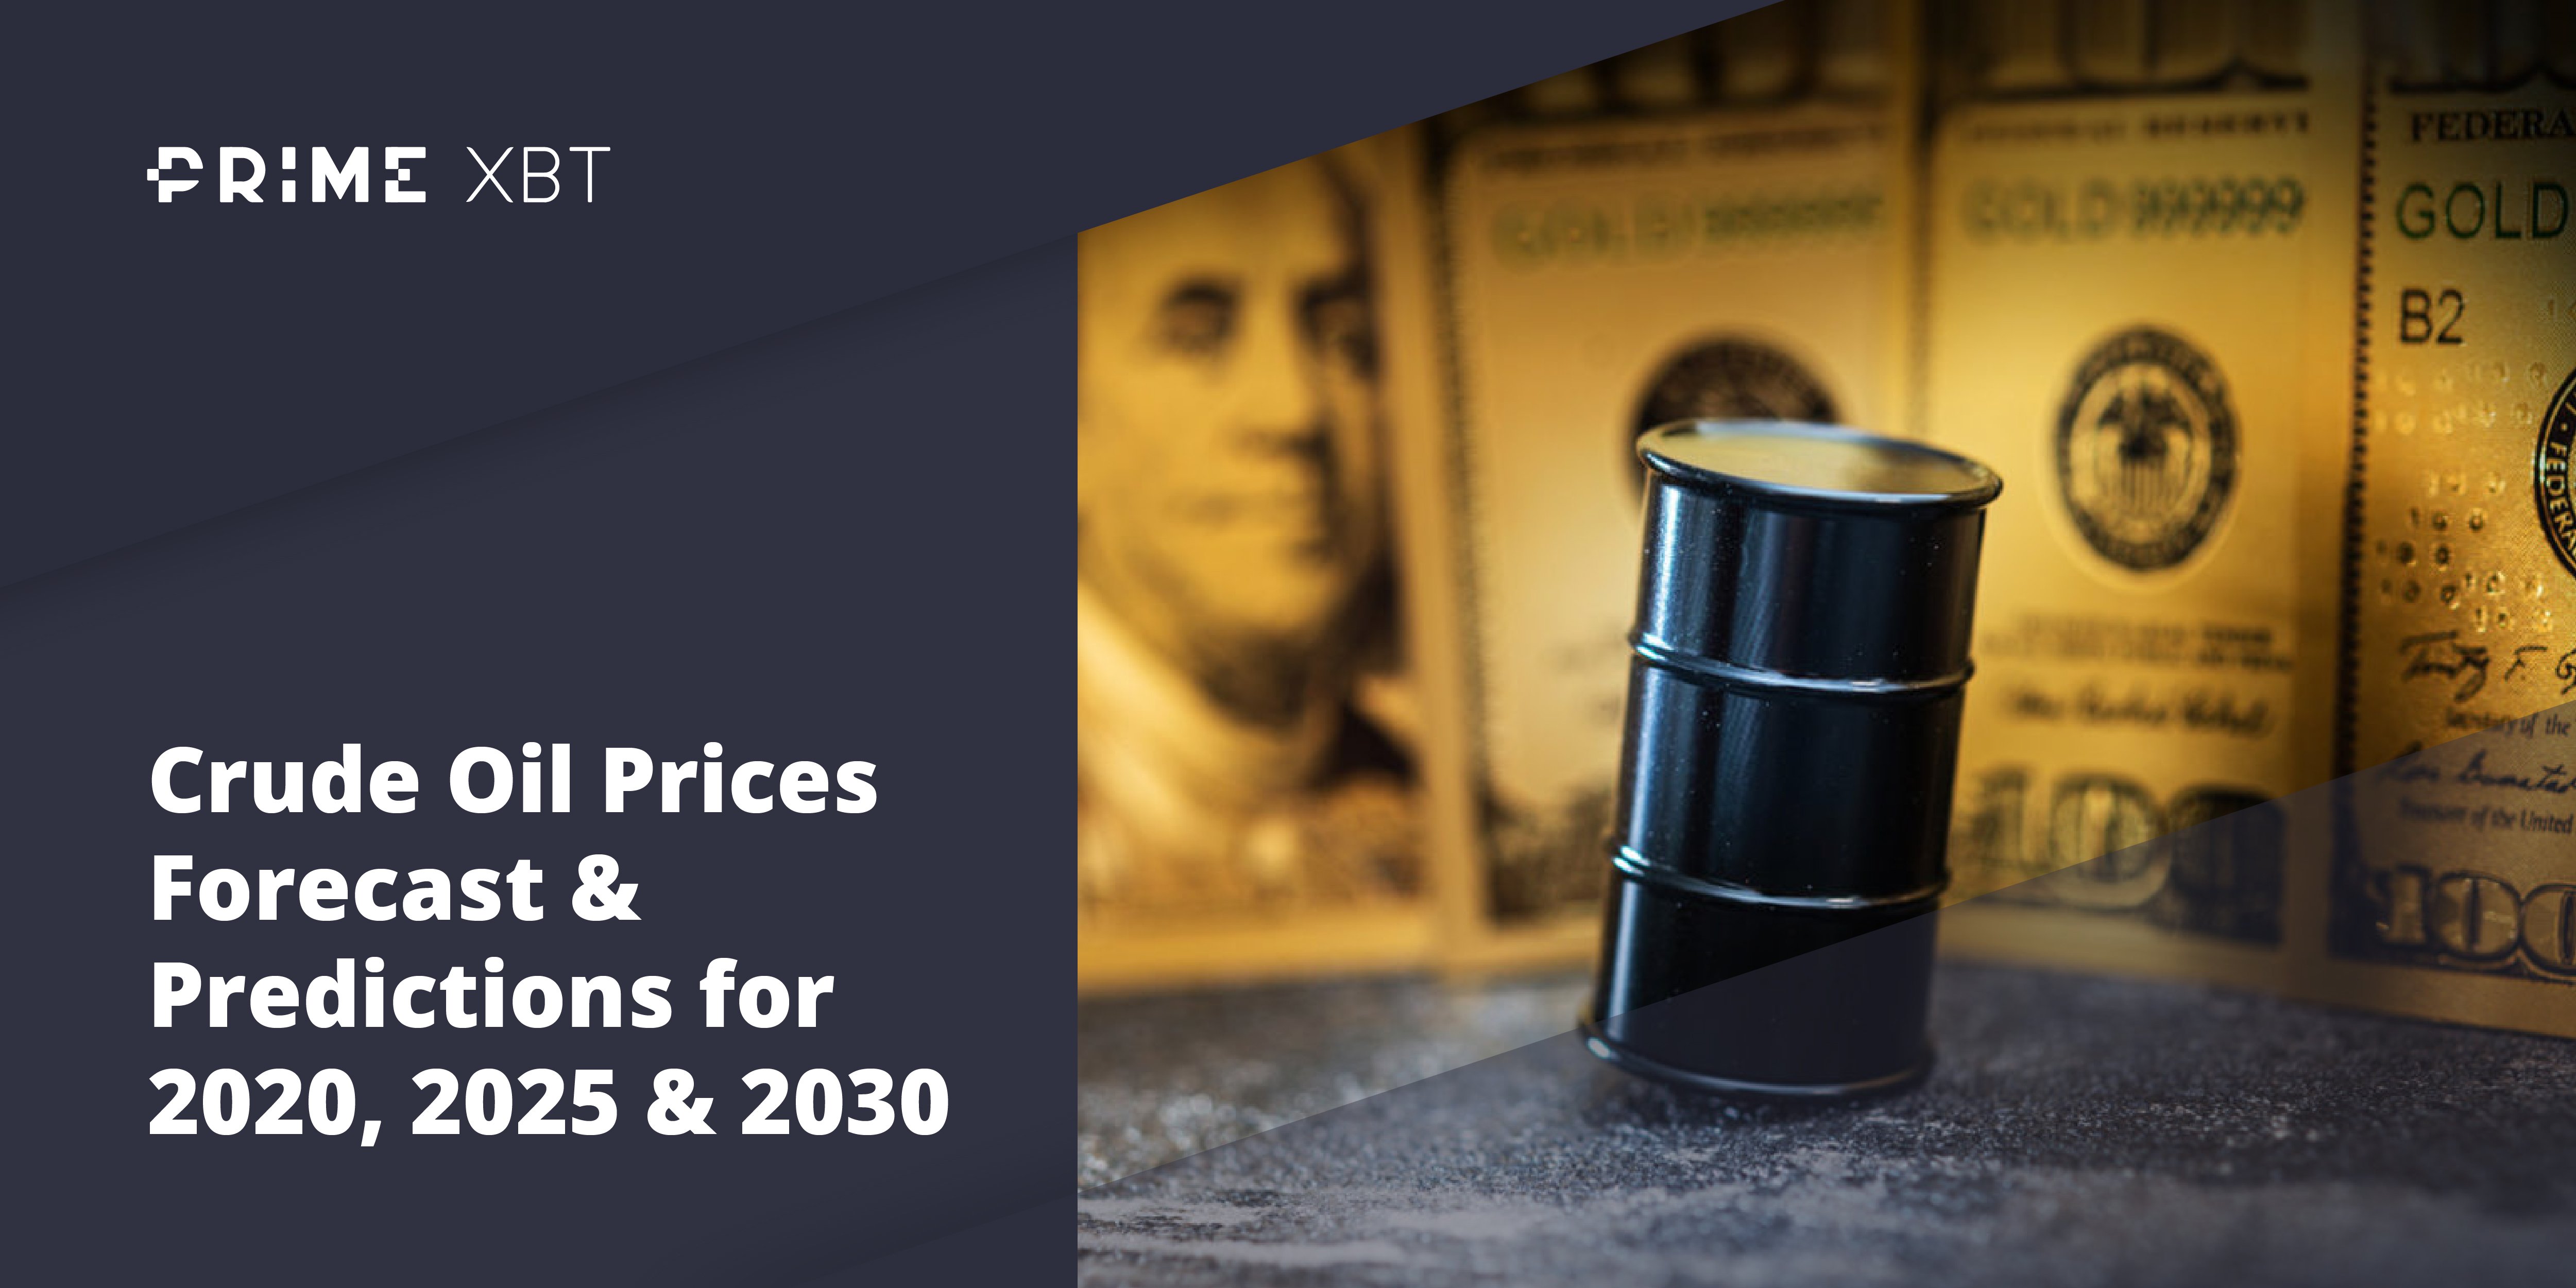 Crude Oil Prices Forecast & Predictions for 2022, 2025 & 2030 - oil1